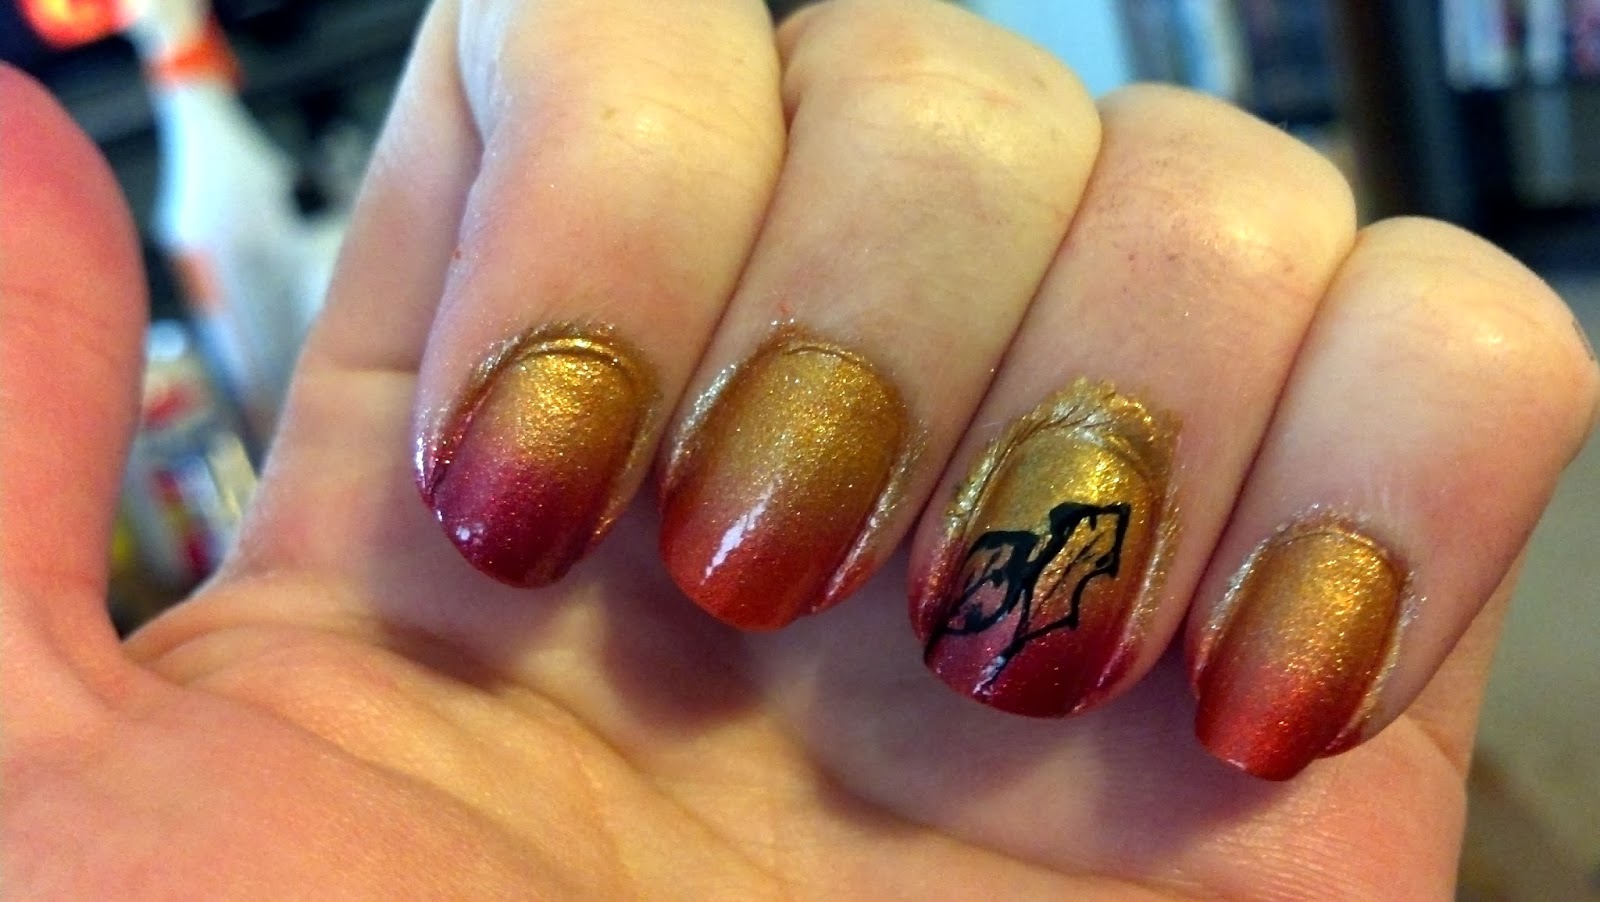 4. "How to Create a Gradient Fall Nail Design" - wide 1